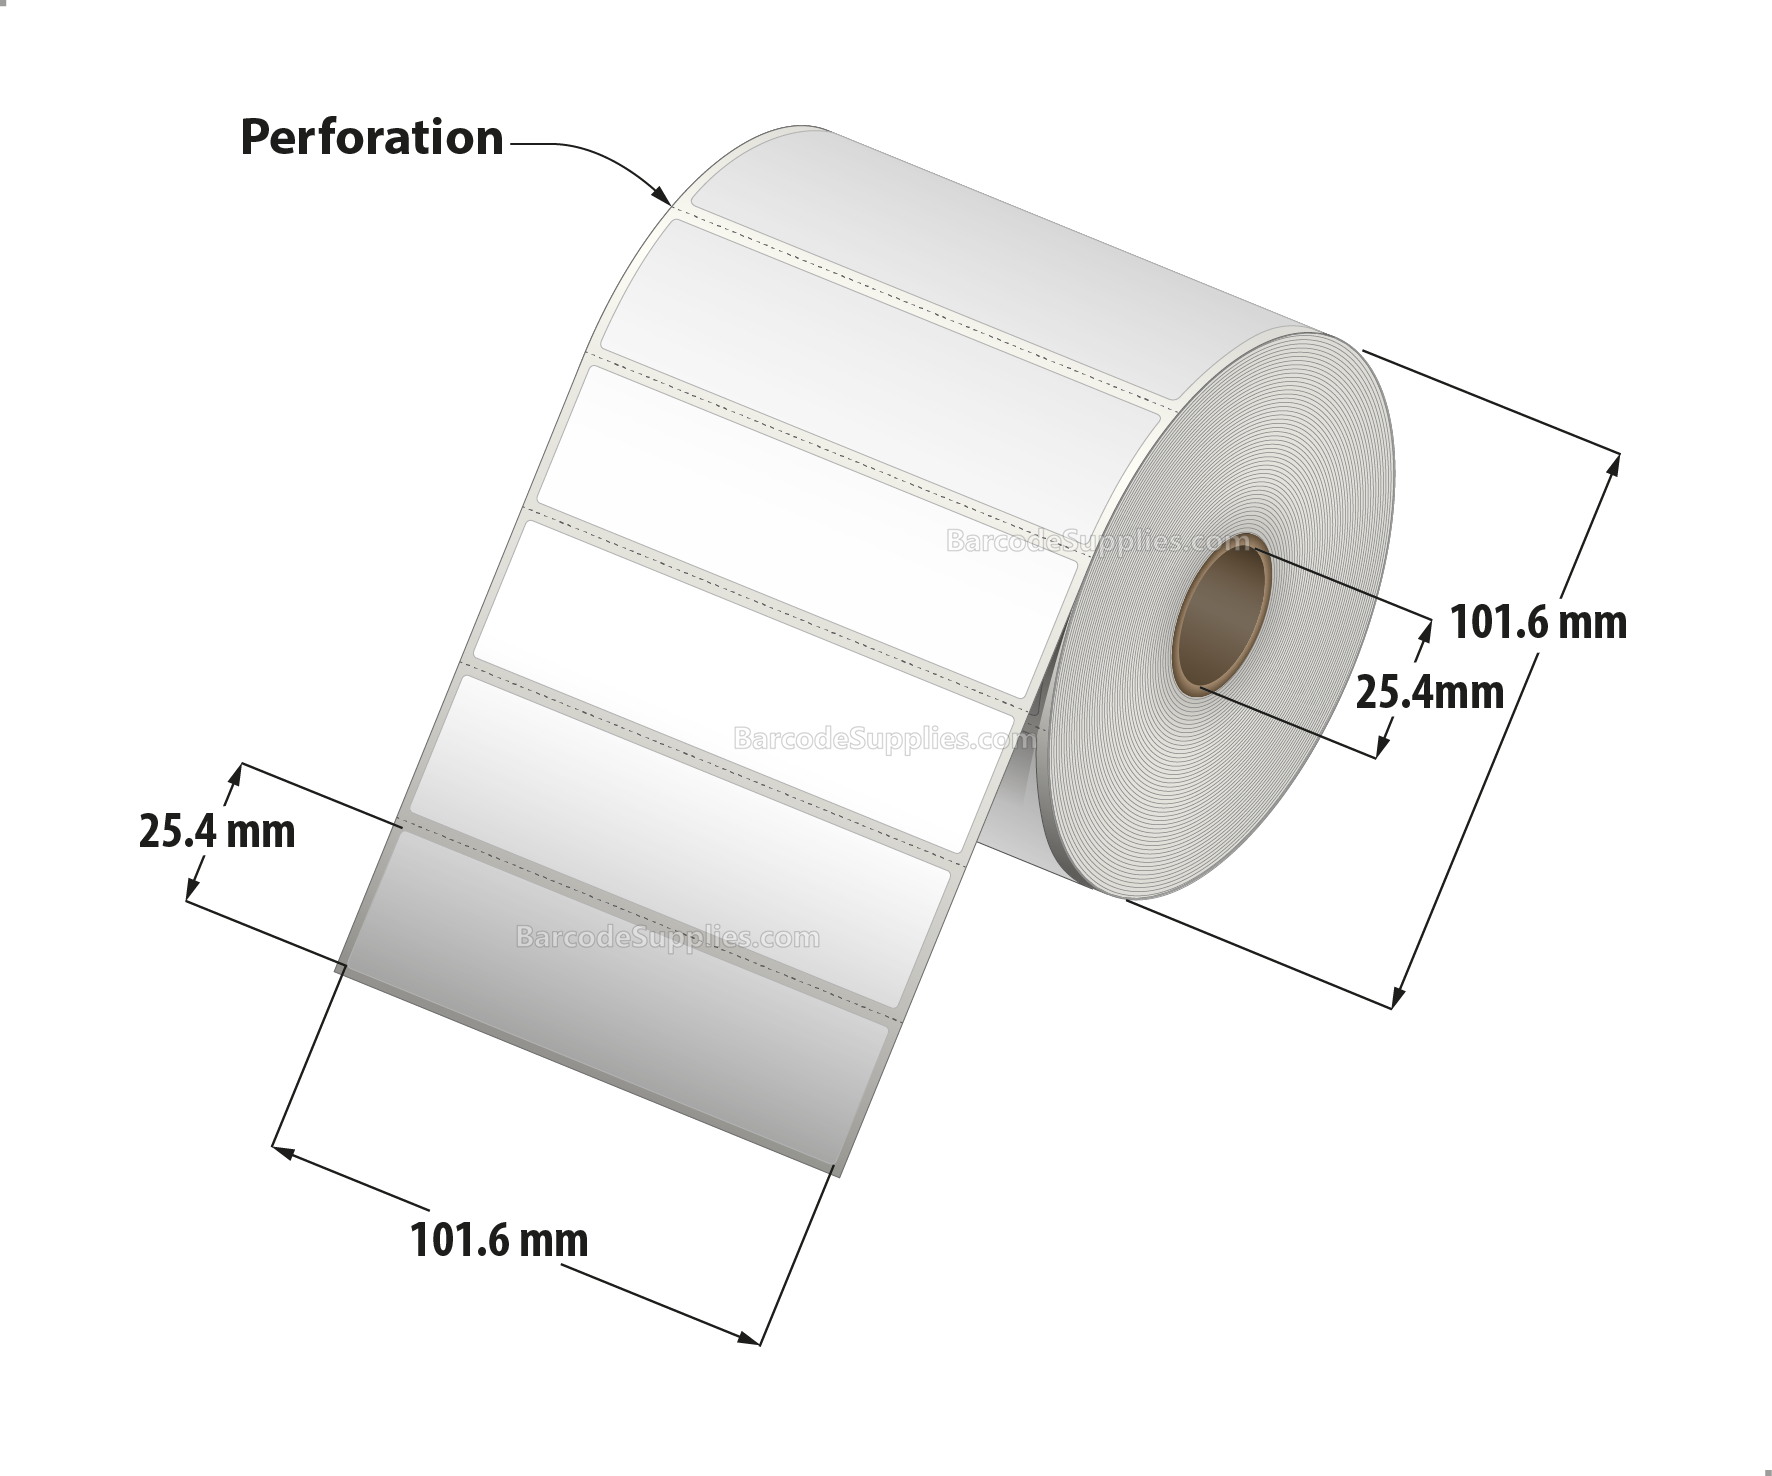 4 x 1 Thermal Transfer White Labels With Permanent Acrylic Adhesive - Perforated - 1310 Labels Per Roll - Carton Of 4 Rolls - 5240 Labels Total - MPN: TH41-14PTT